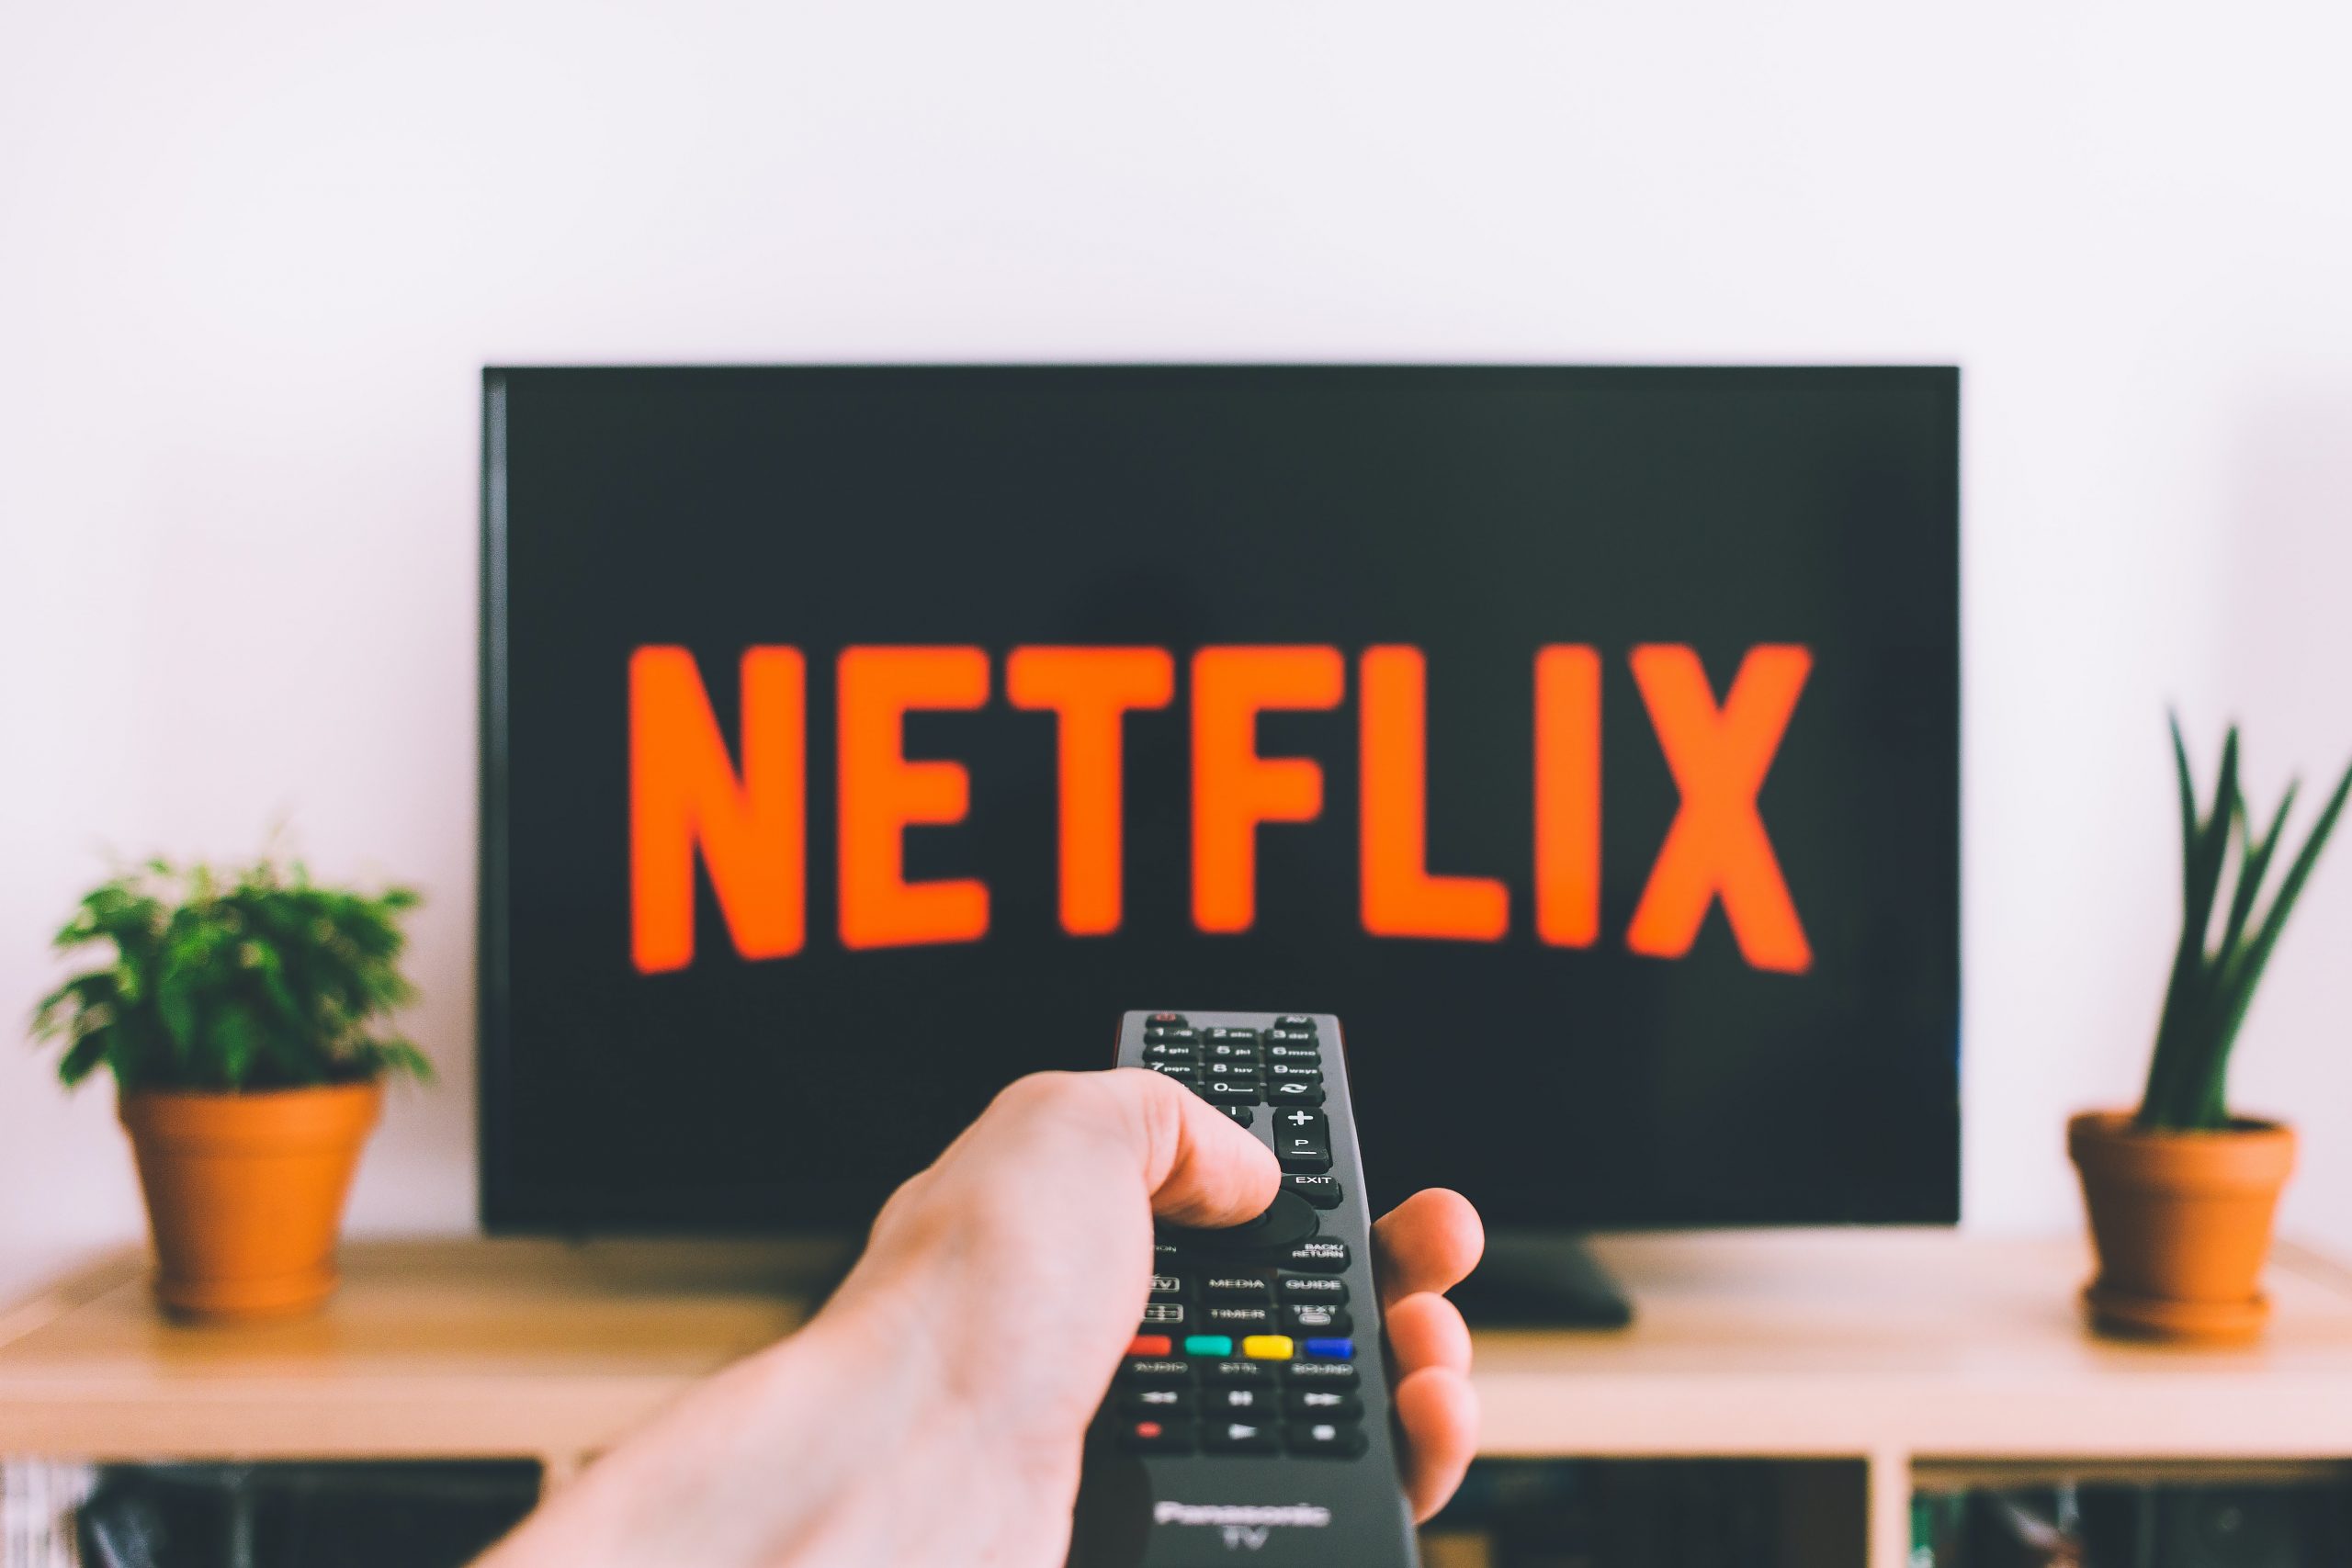 The Deputy MB adds that the people of Kelantan can simply watch Netflix or other streaming services instead. Image credit: freestocks on Unsplash